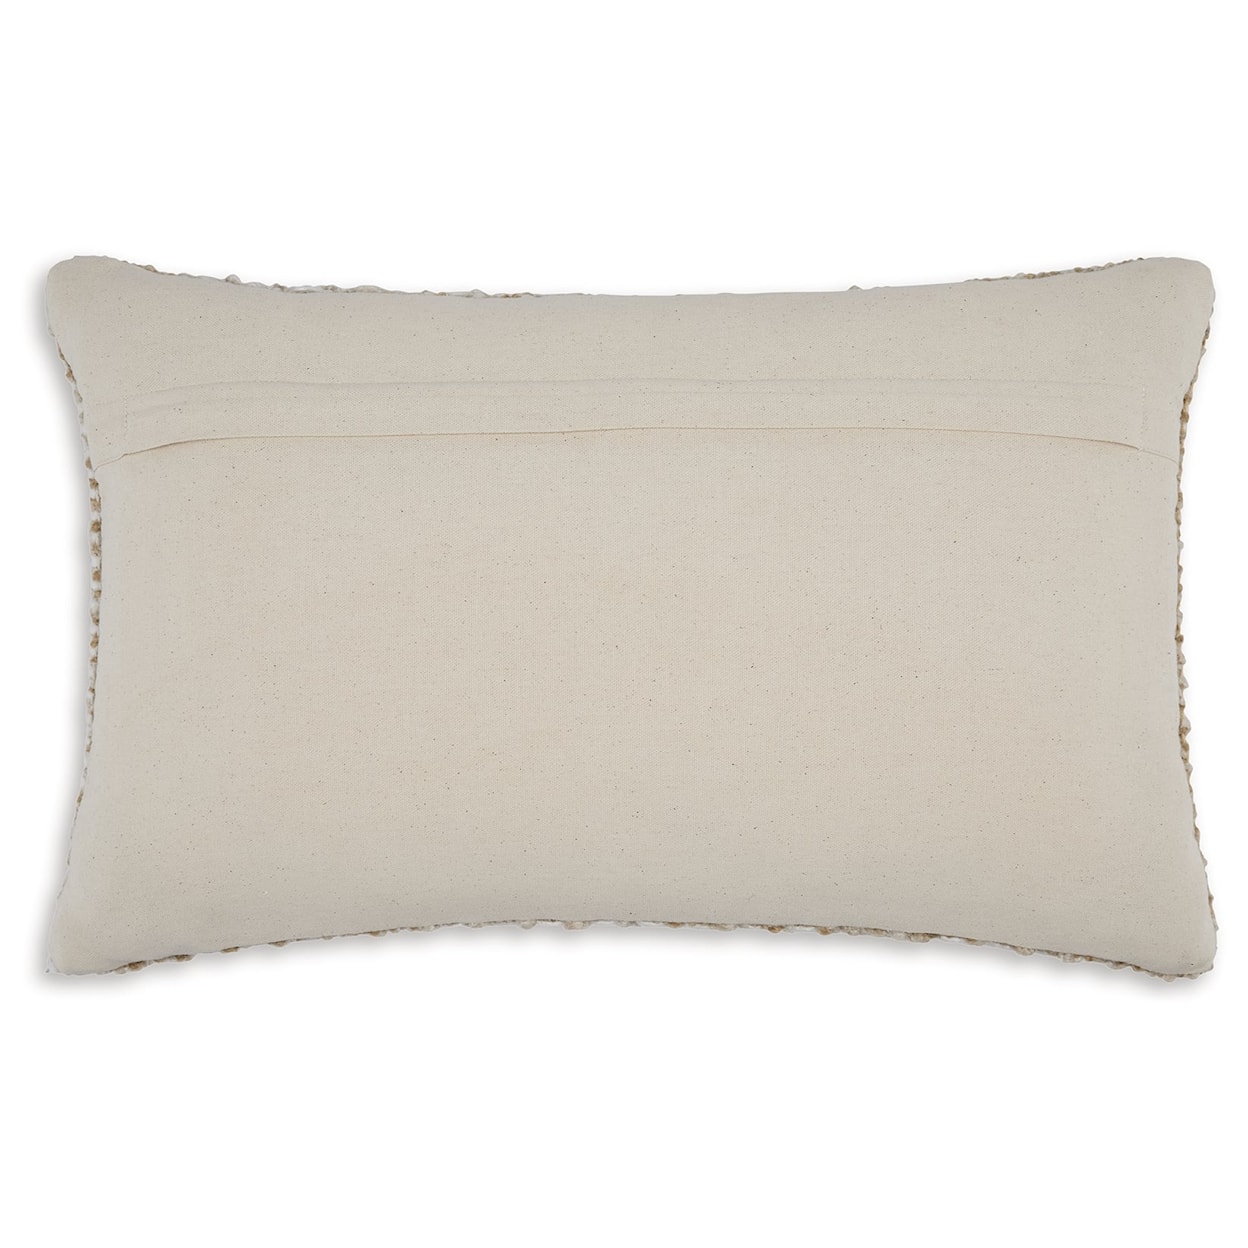 Benchcraft Hathby Pillow (Set Of 4)